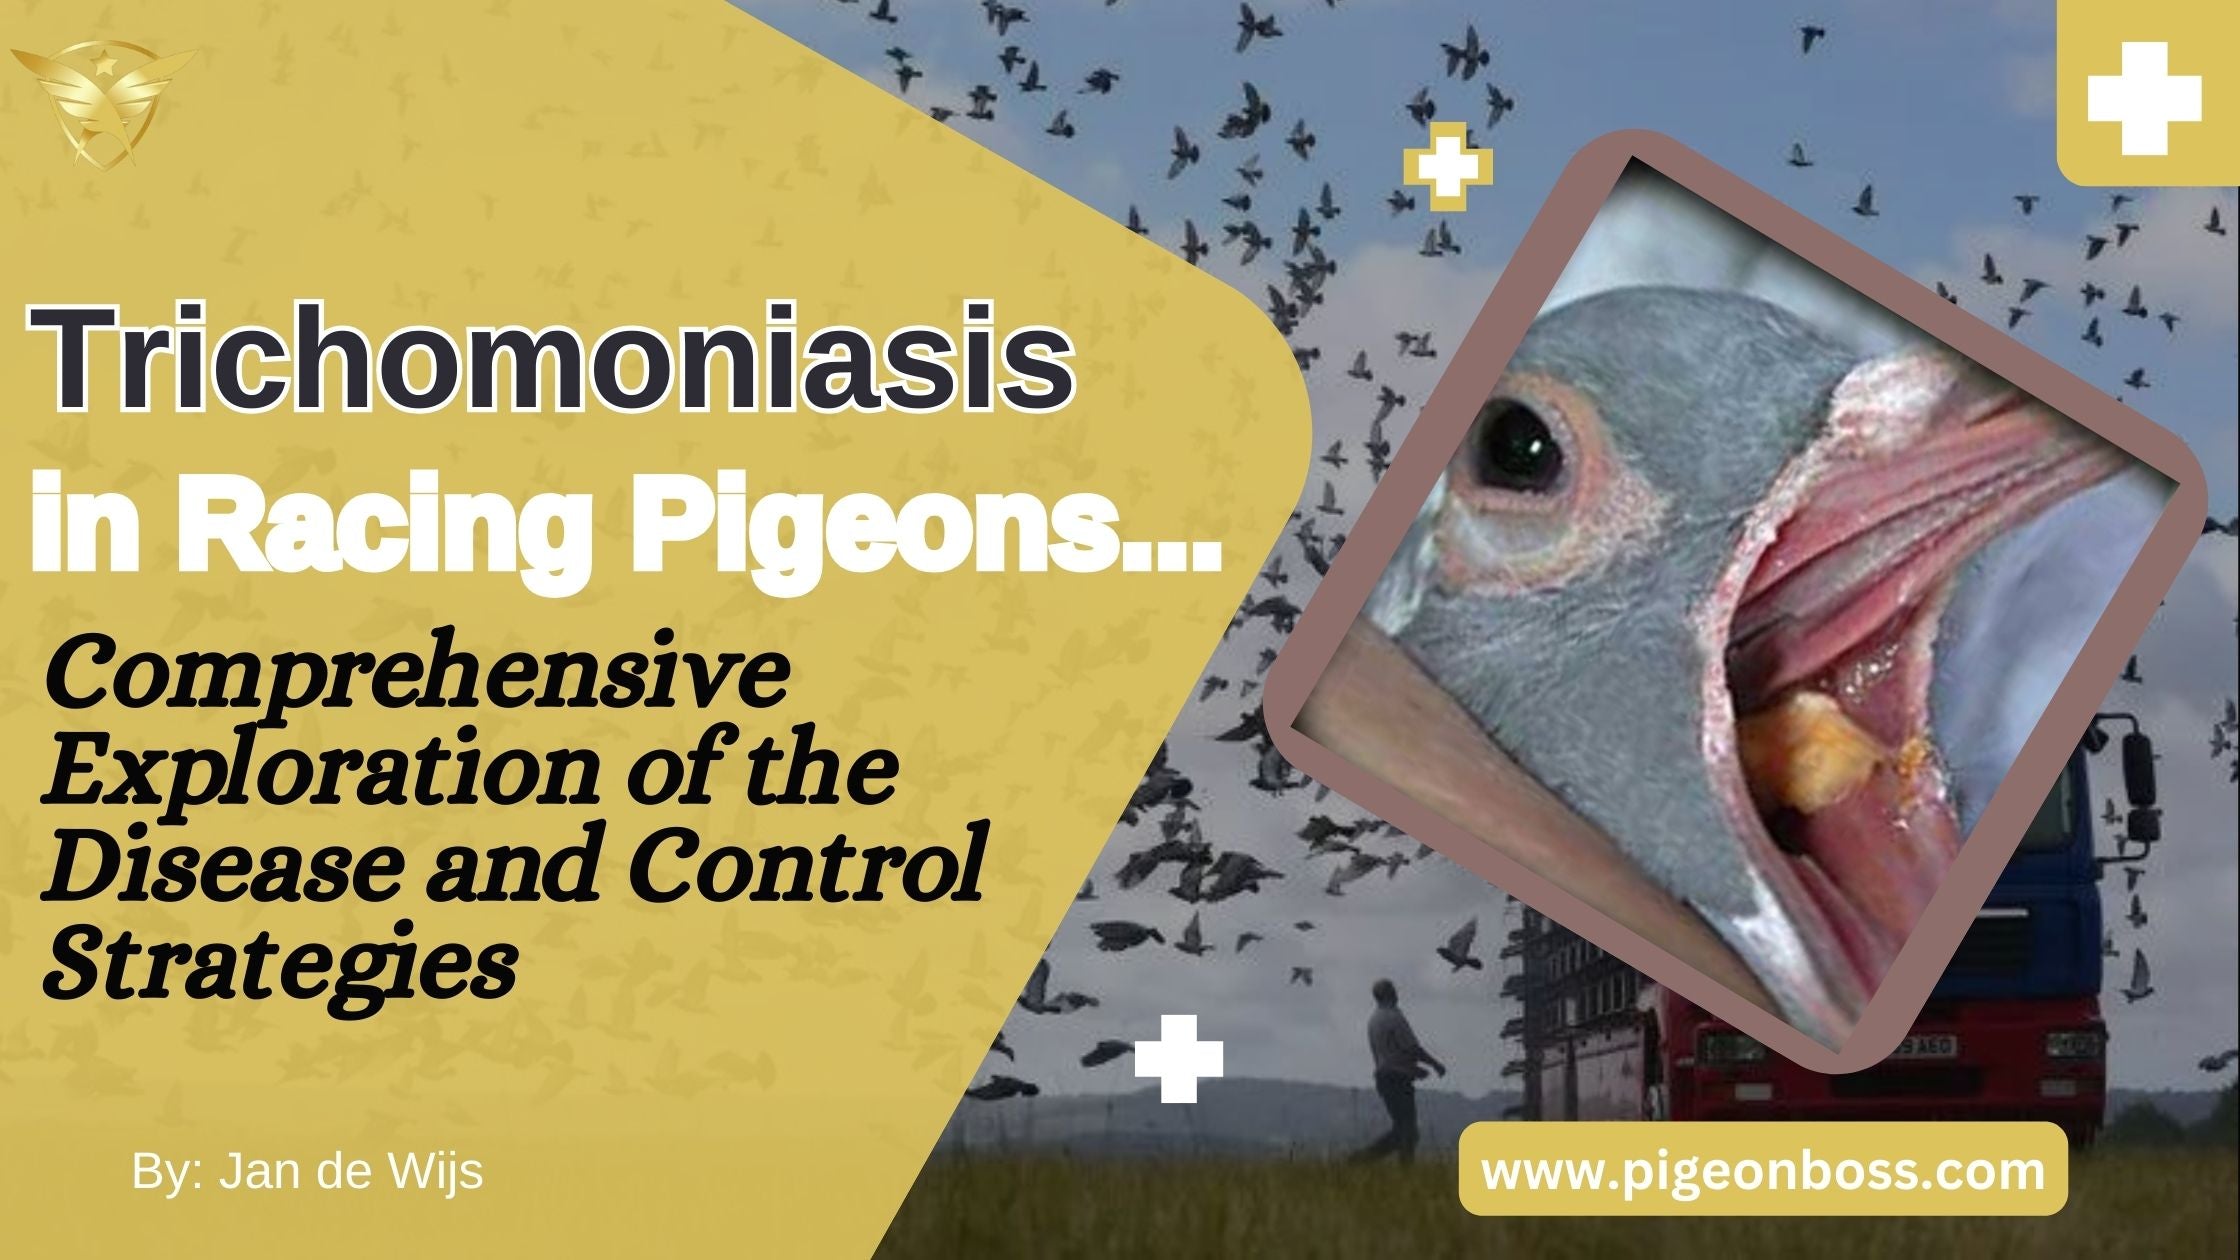 Trichomoniasis Gallinae in Racing Pigeons: A Comprehensive Exploration of the Disease and Control Strategies